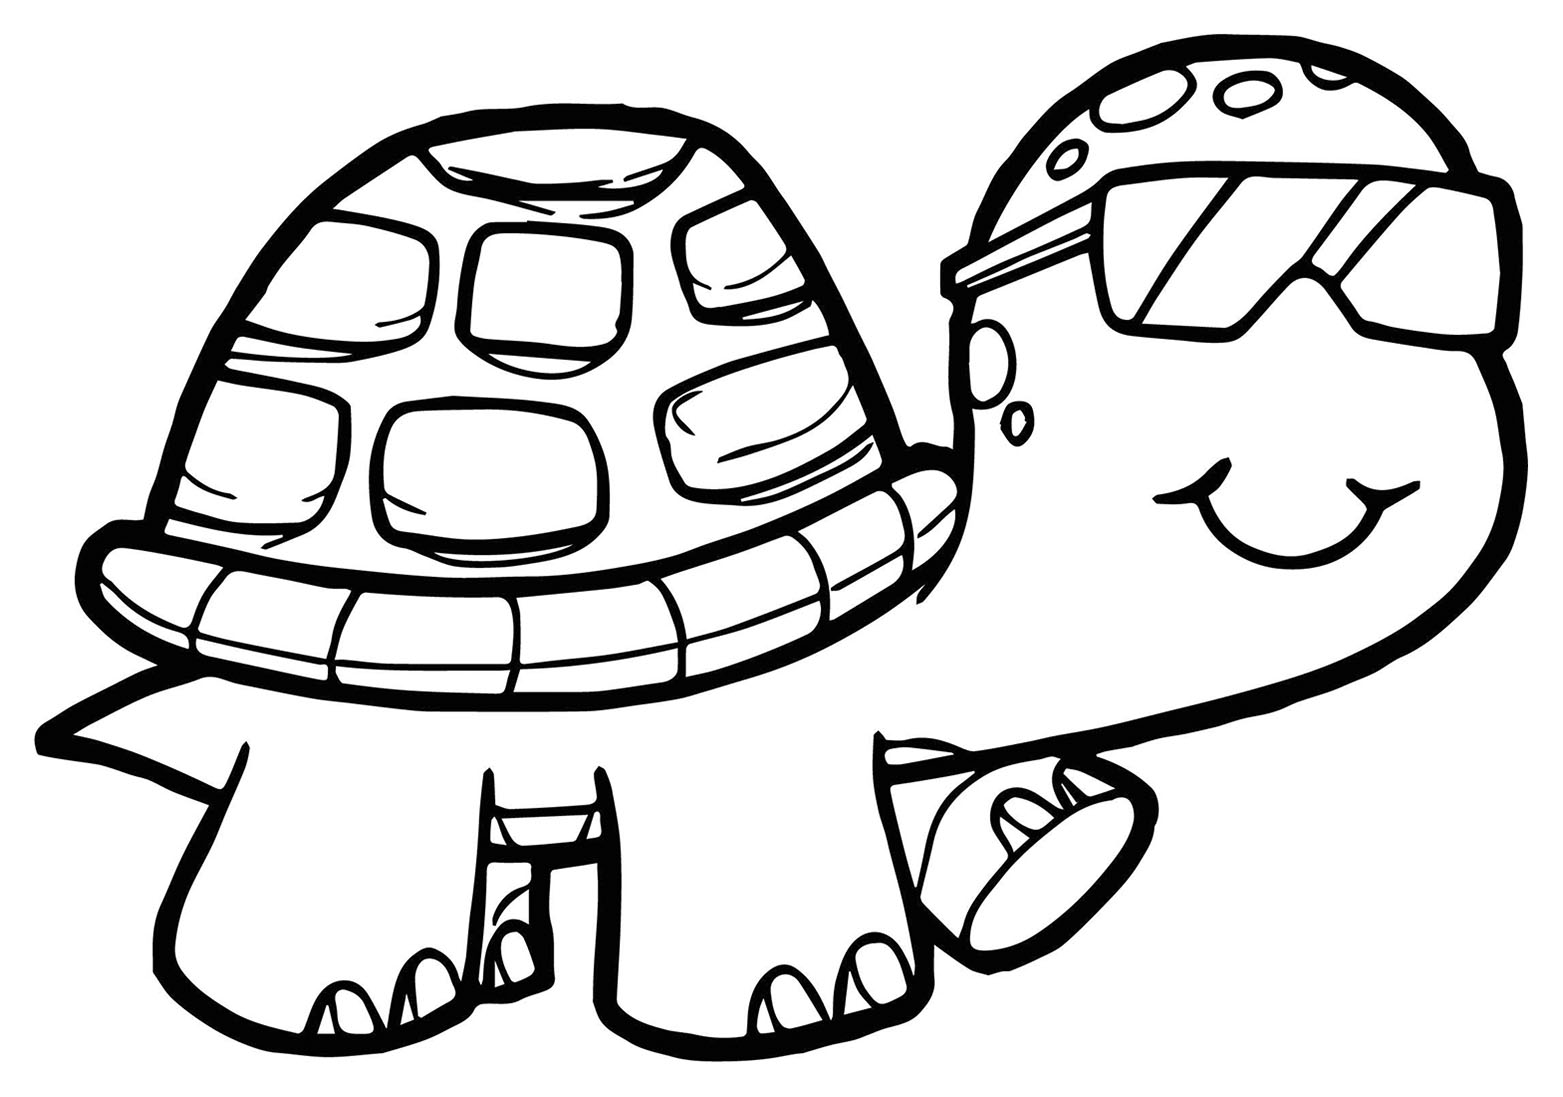 Turtle Coloring For Kids - Turtles Kids Coloring Pages